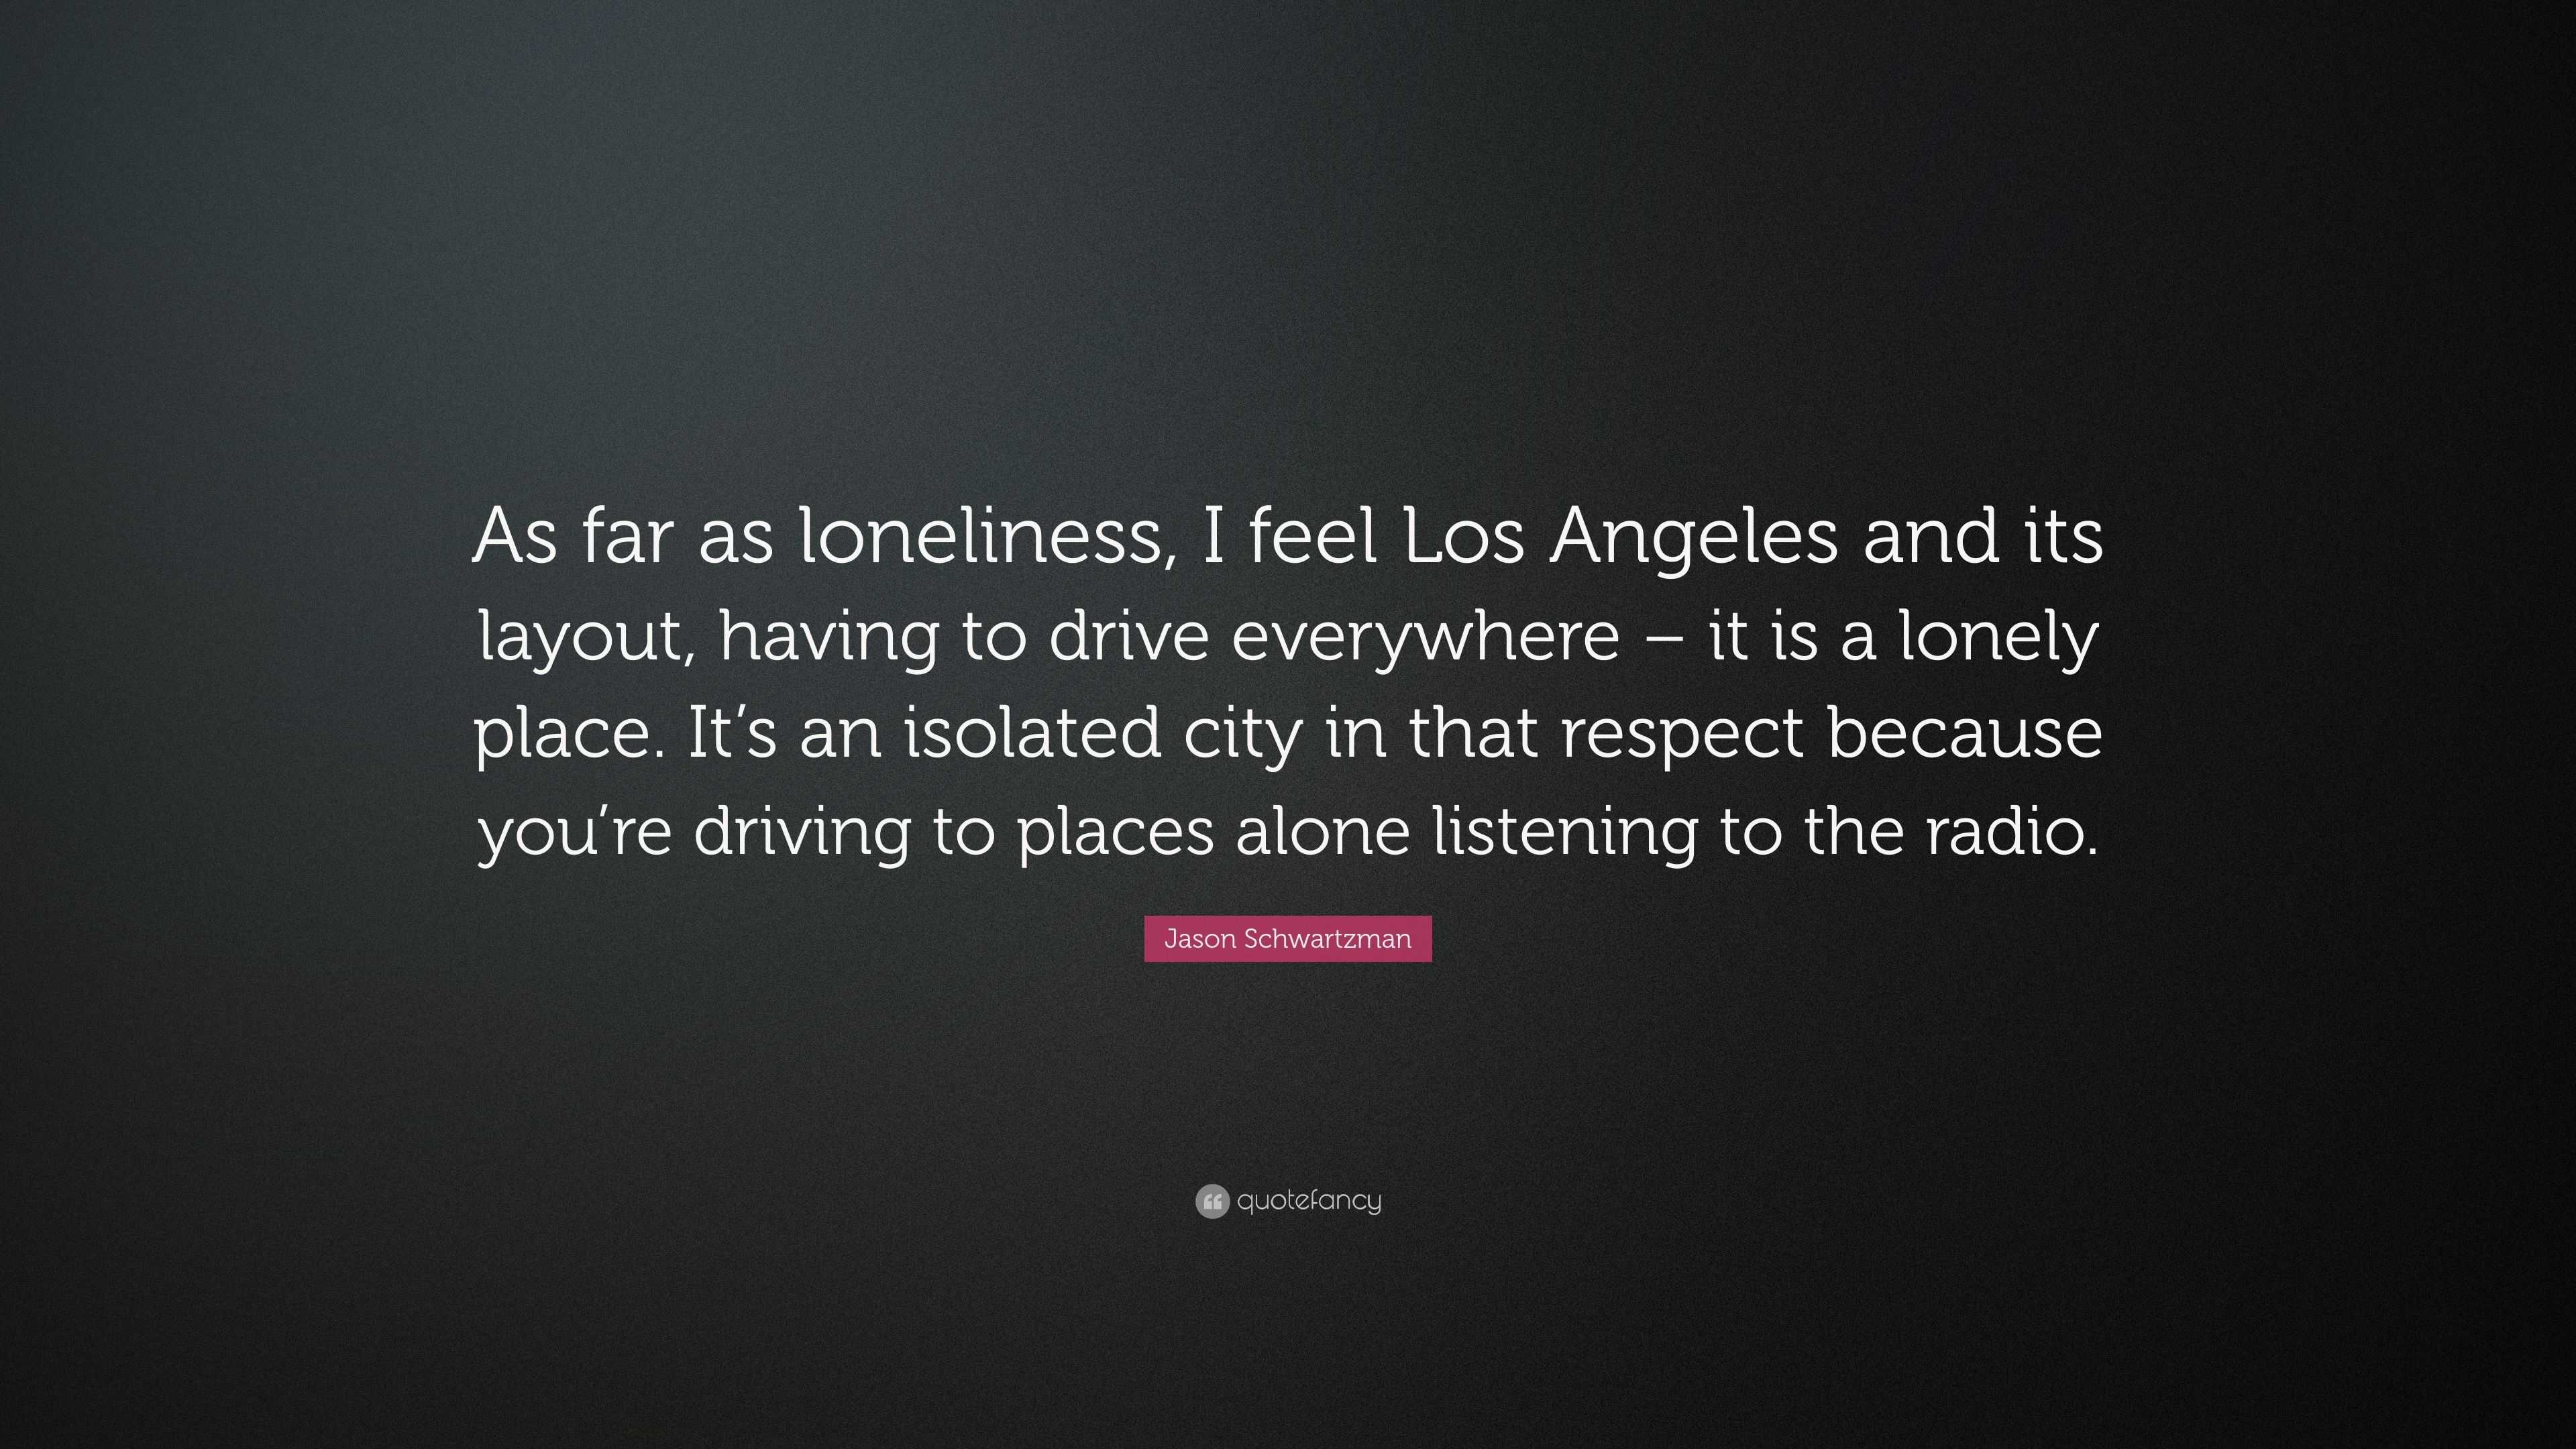 Los Angeles is Lonely